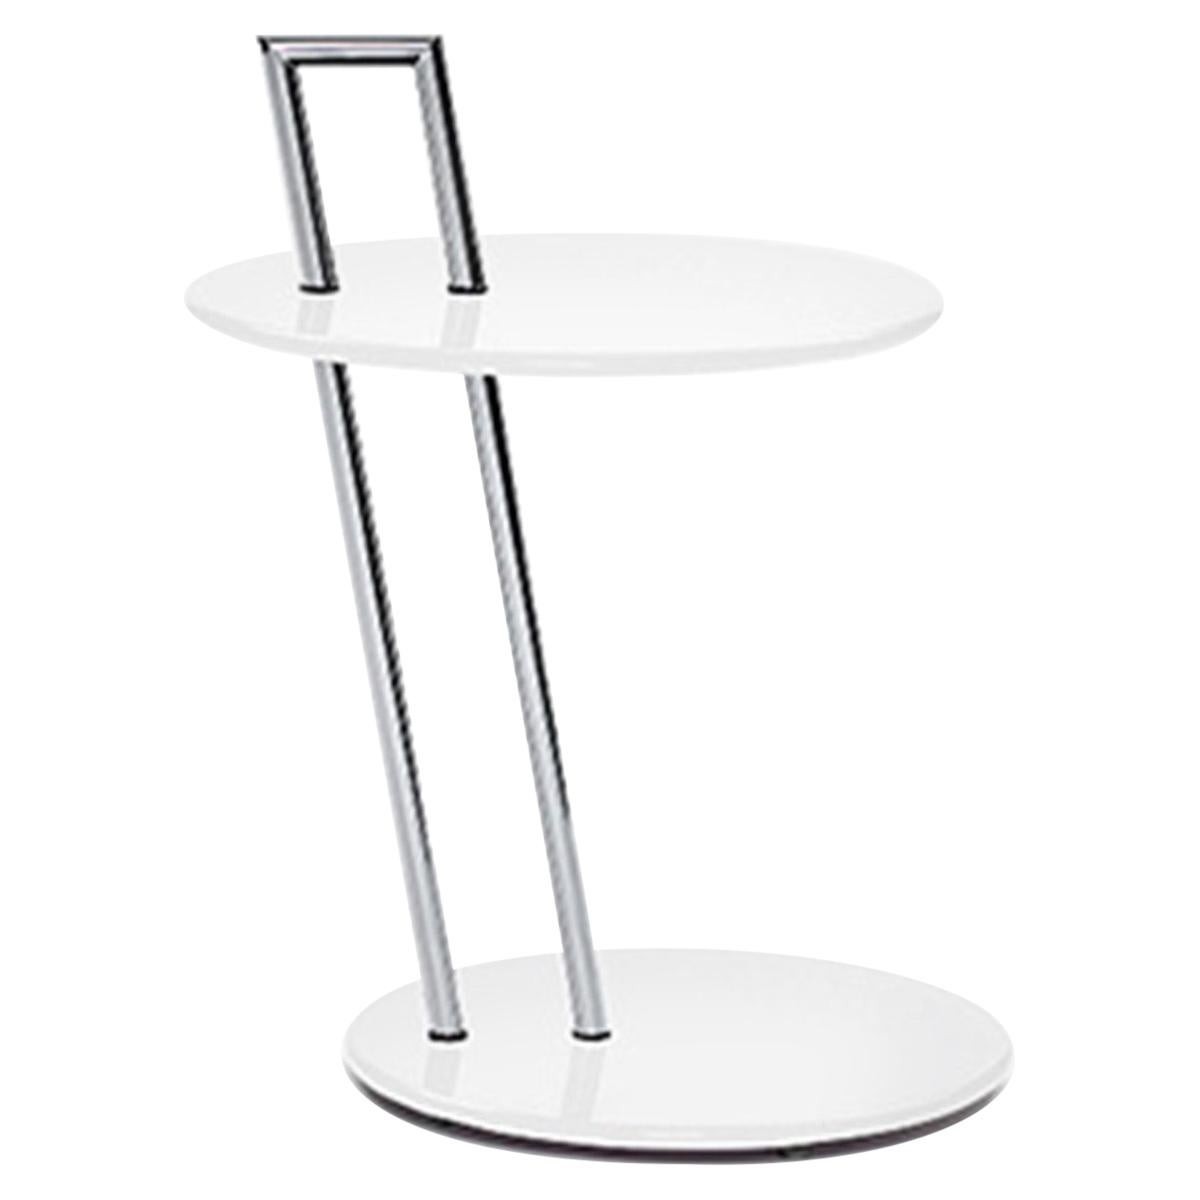 Table d'appoint ronde ClassiCon blanche en blanc d'Eileen Gray